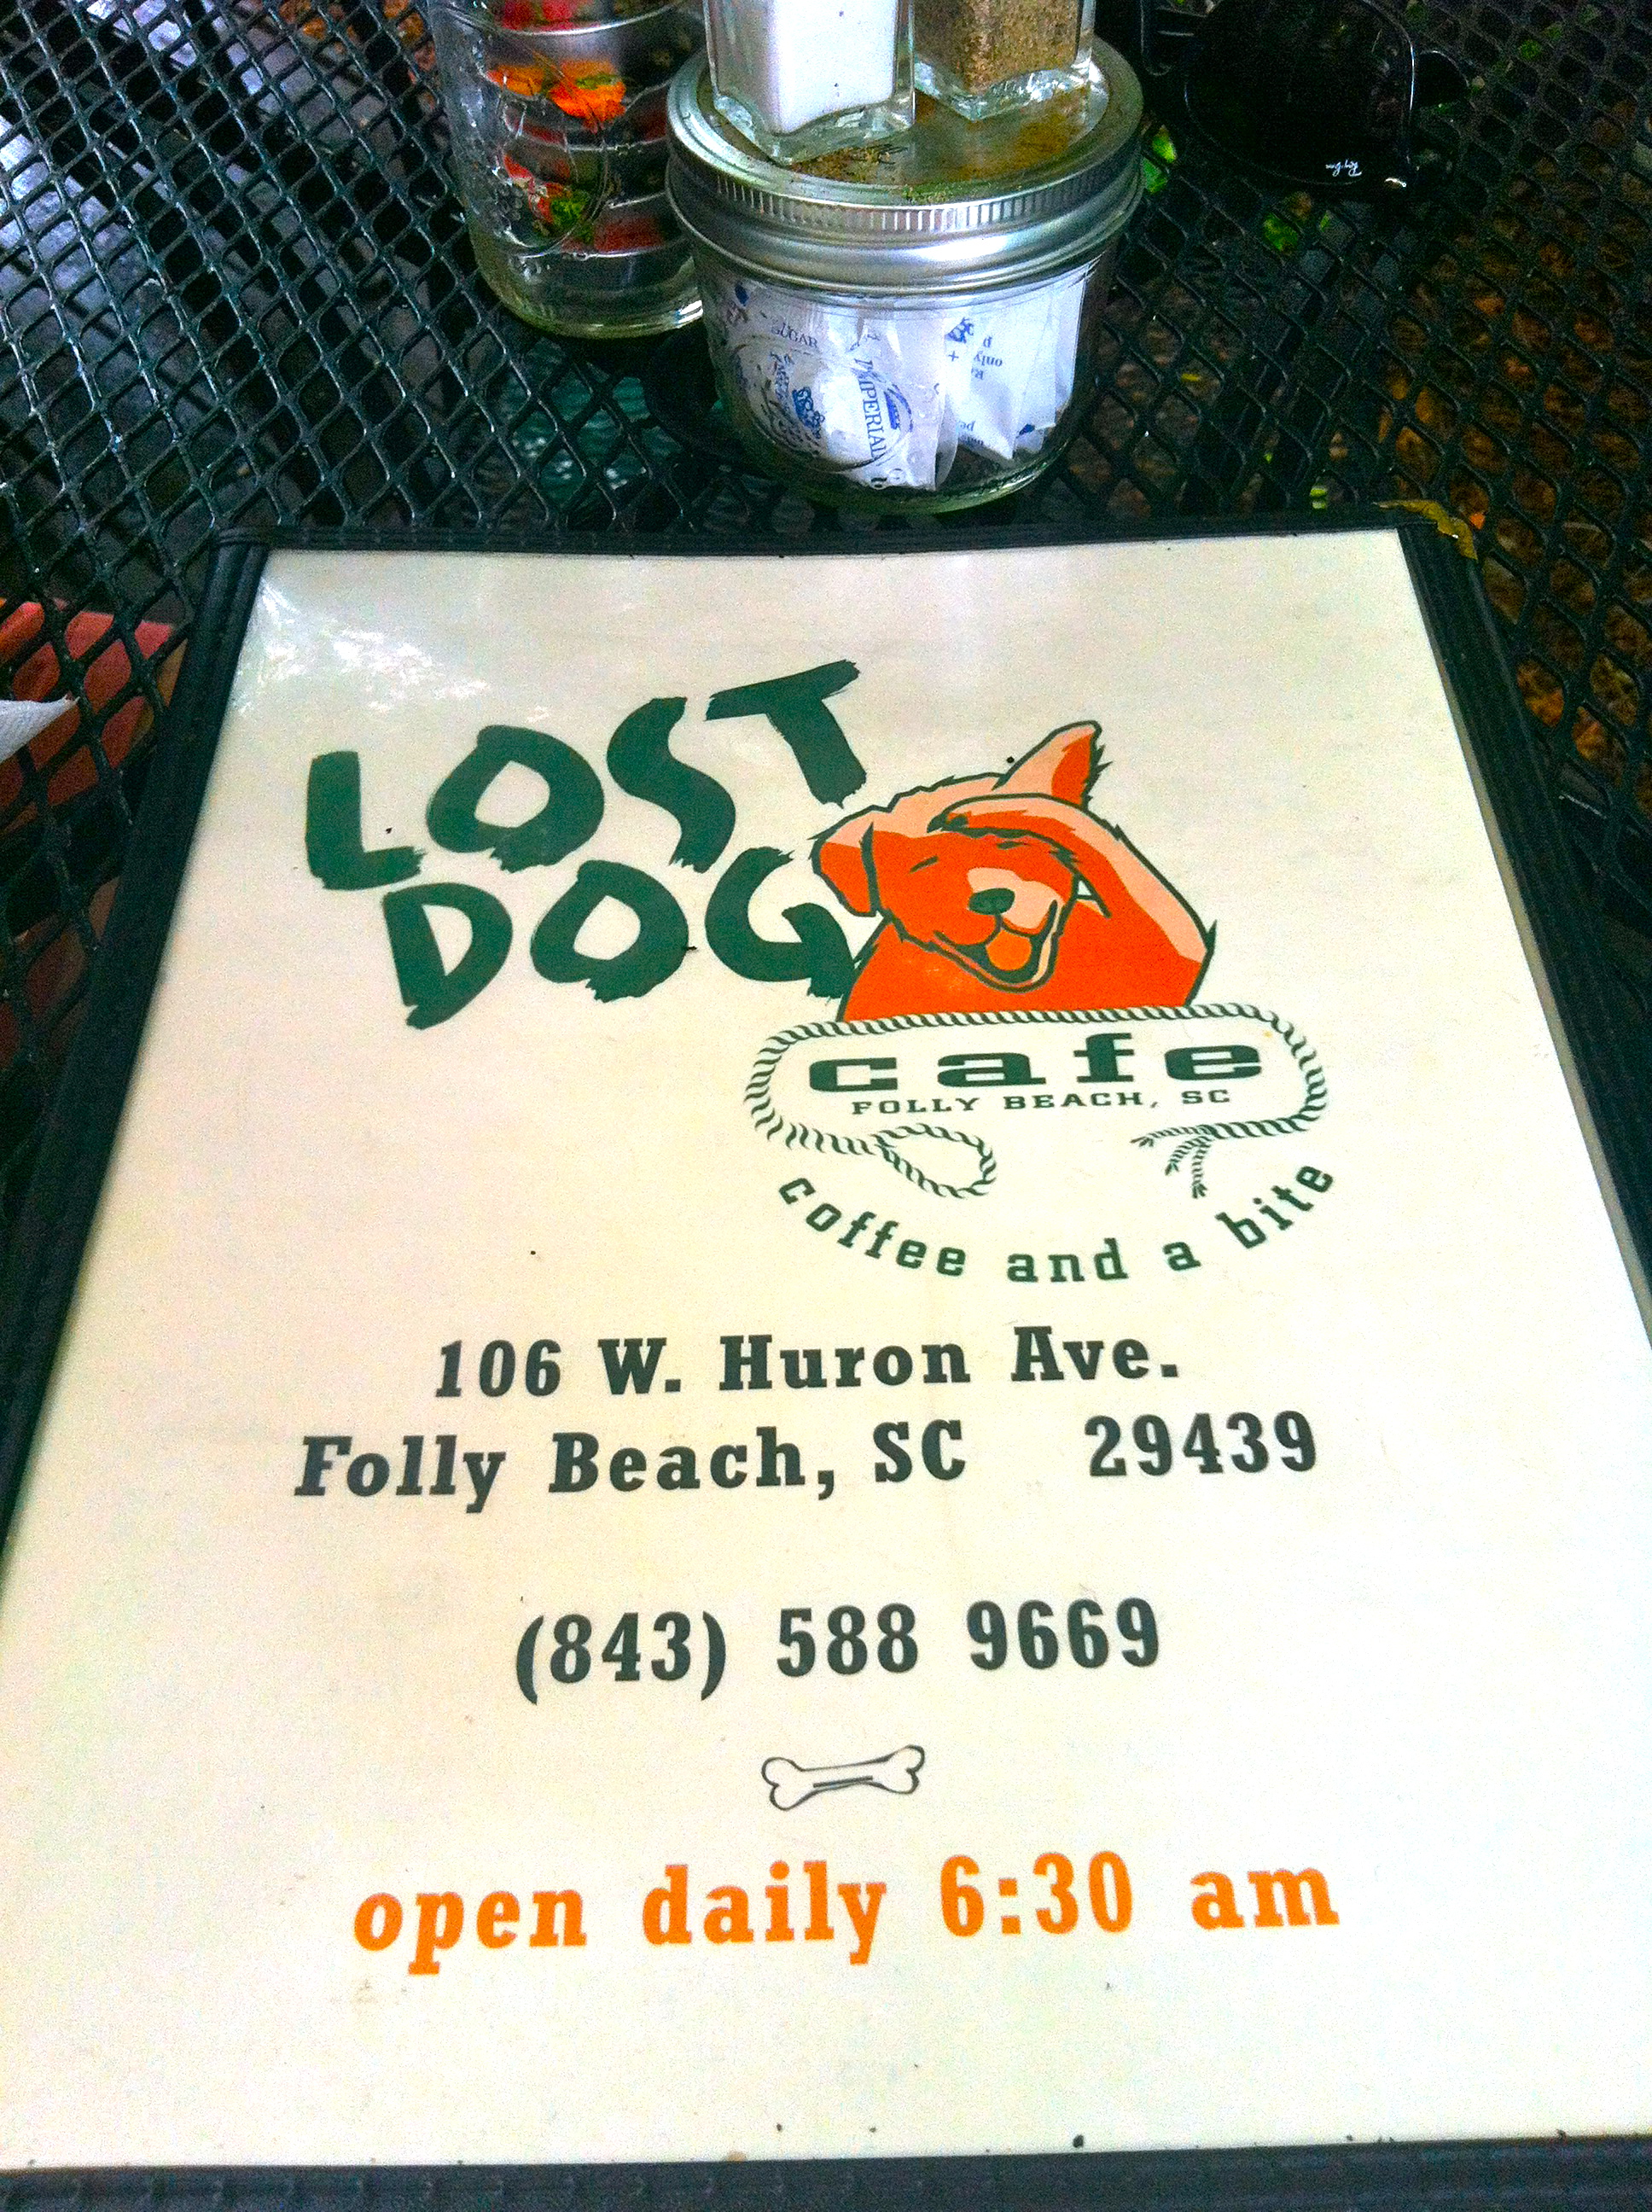 Lost Dog Cafe | Girl About Columbus